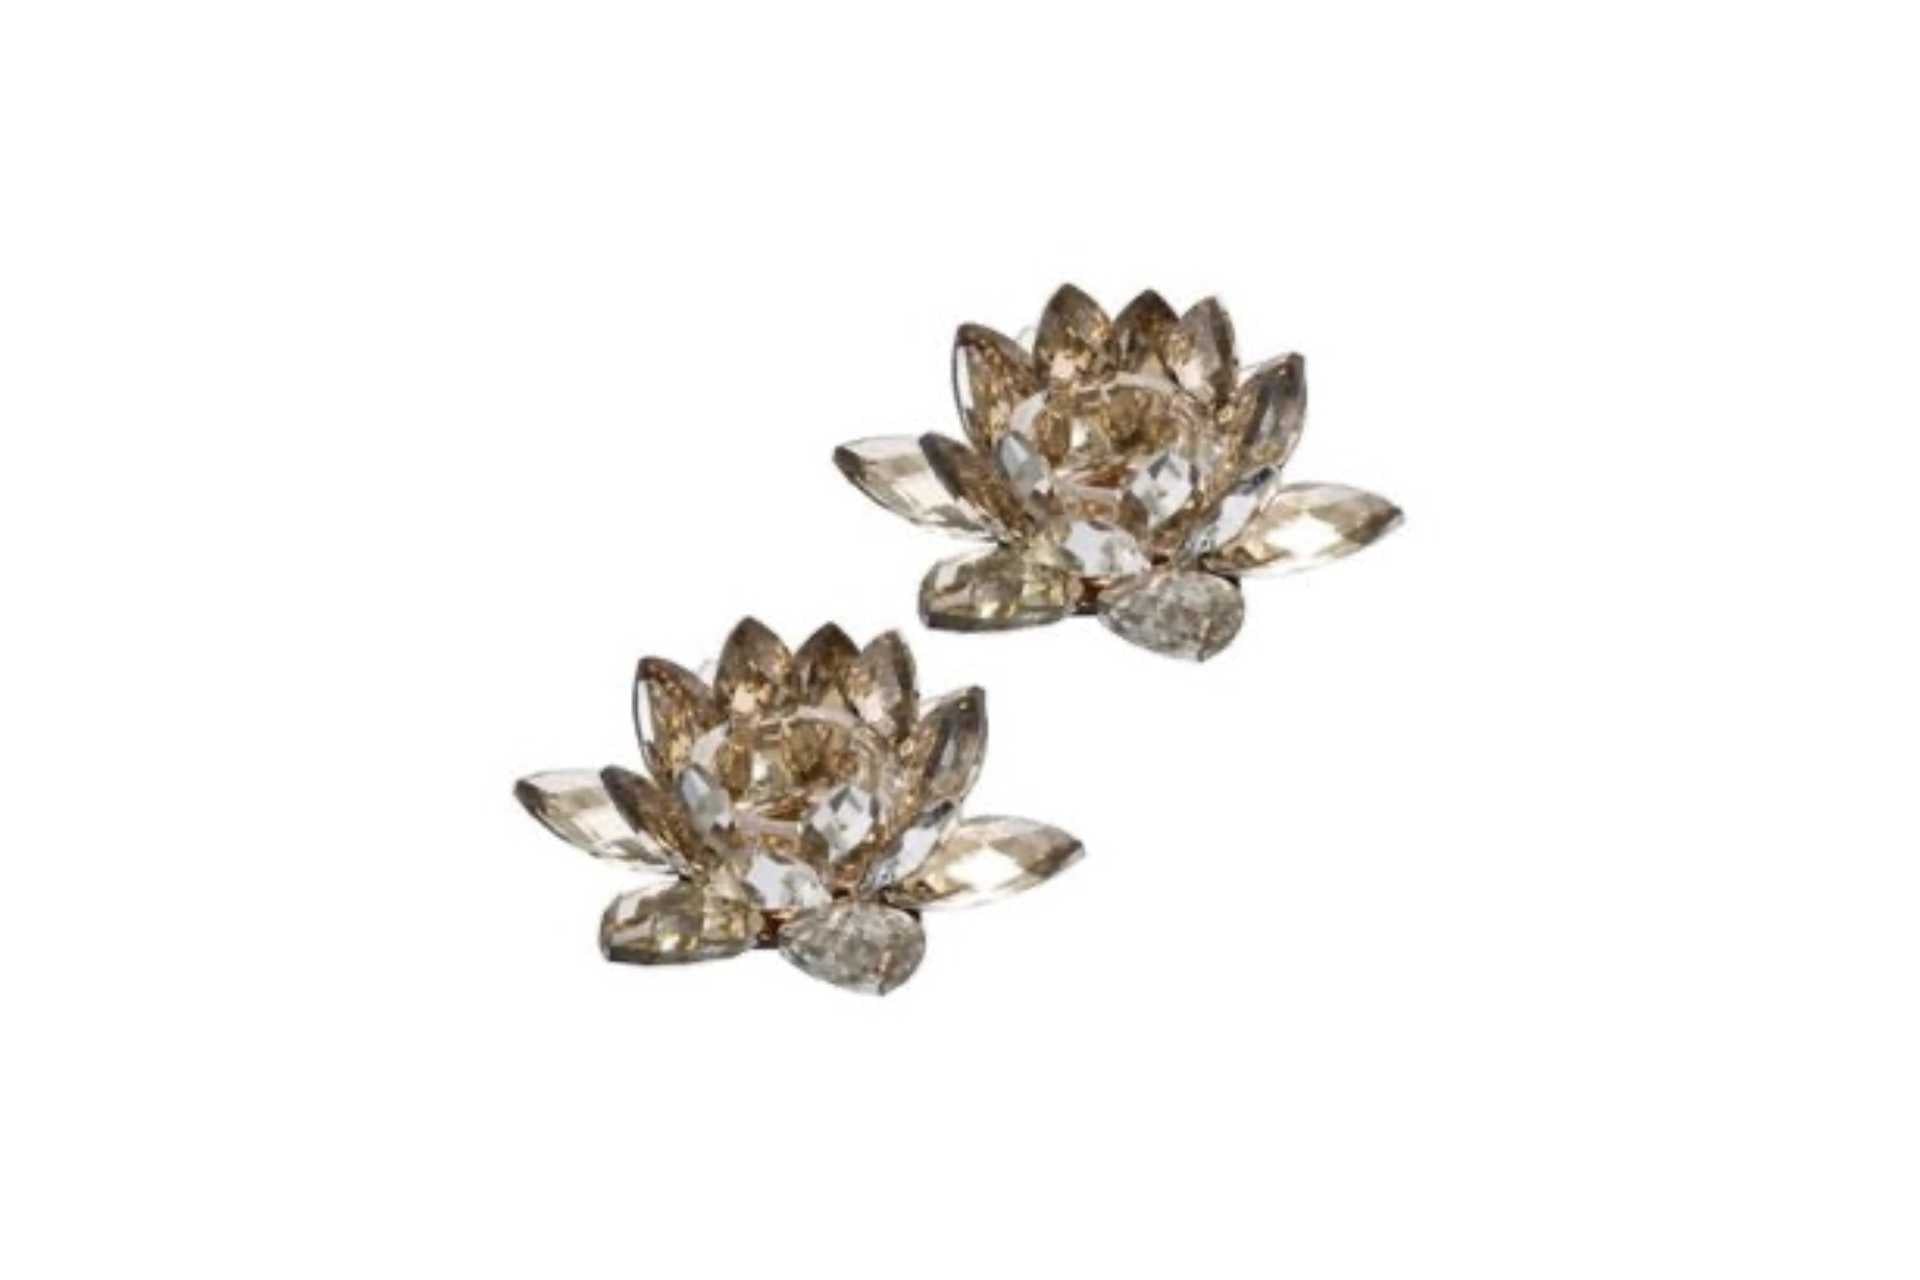 genuine crystal candle holders in a bronze shade and lotus flower shape